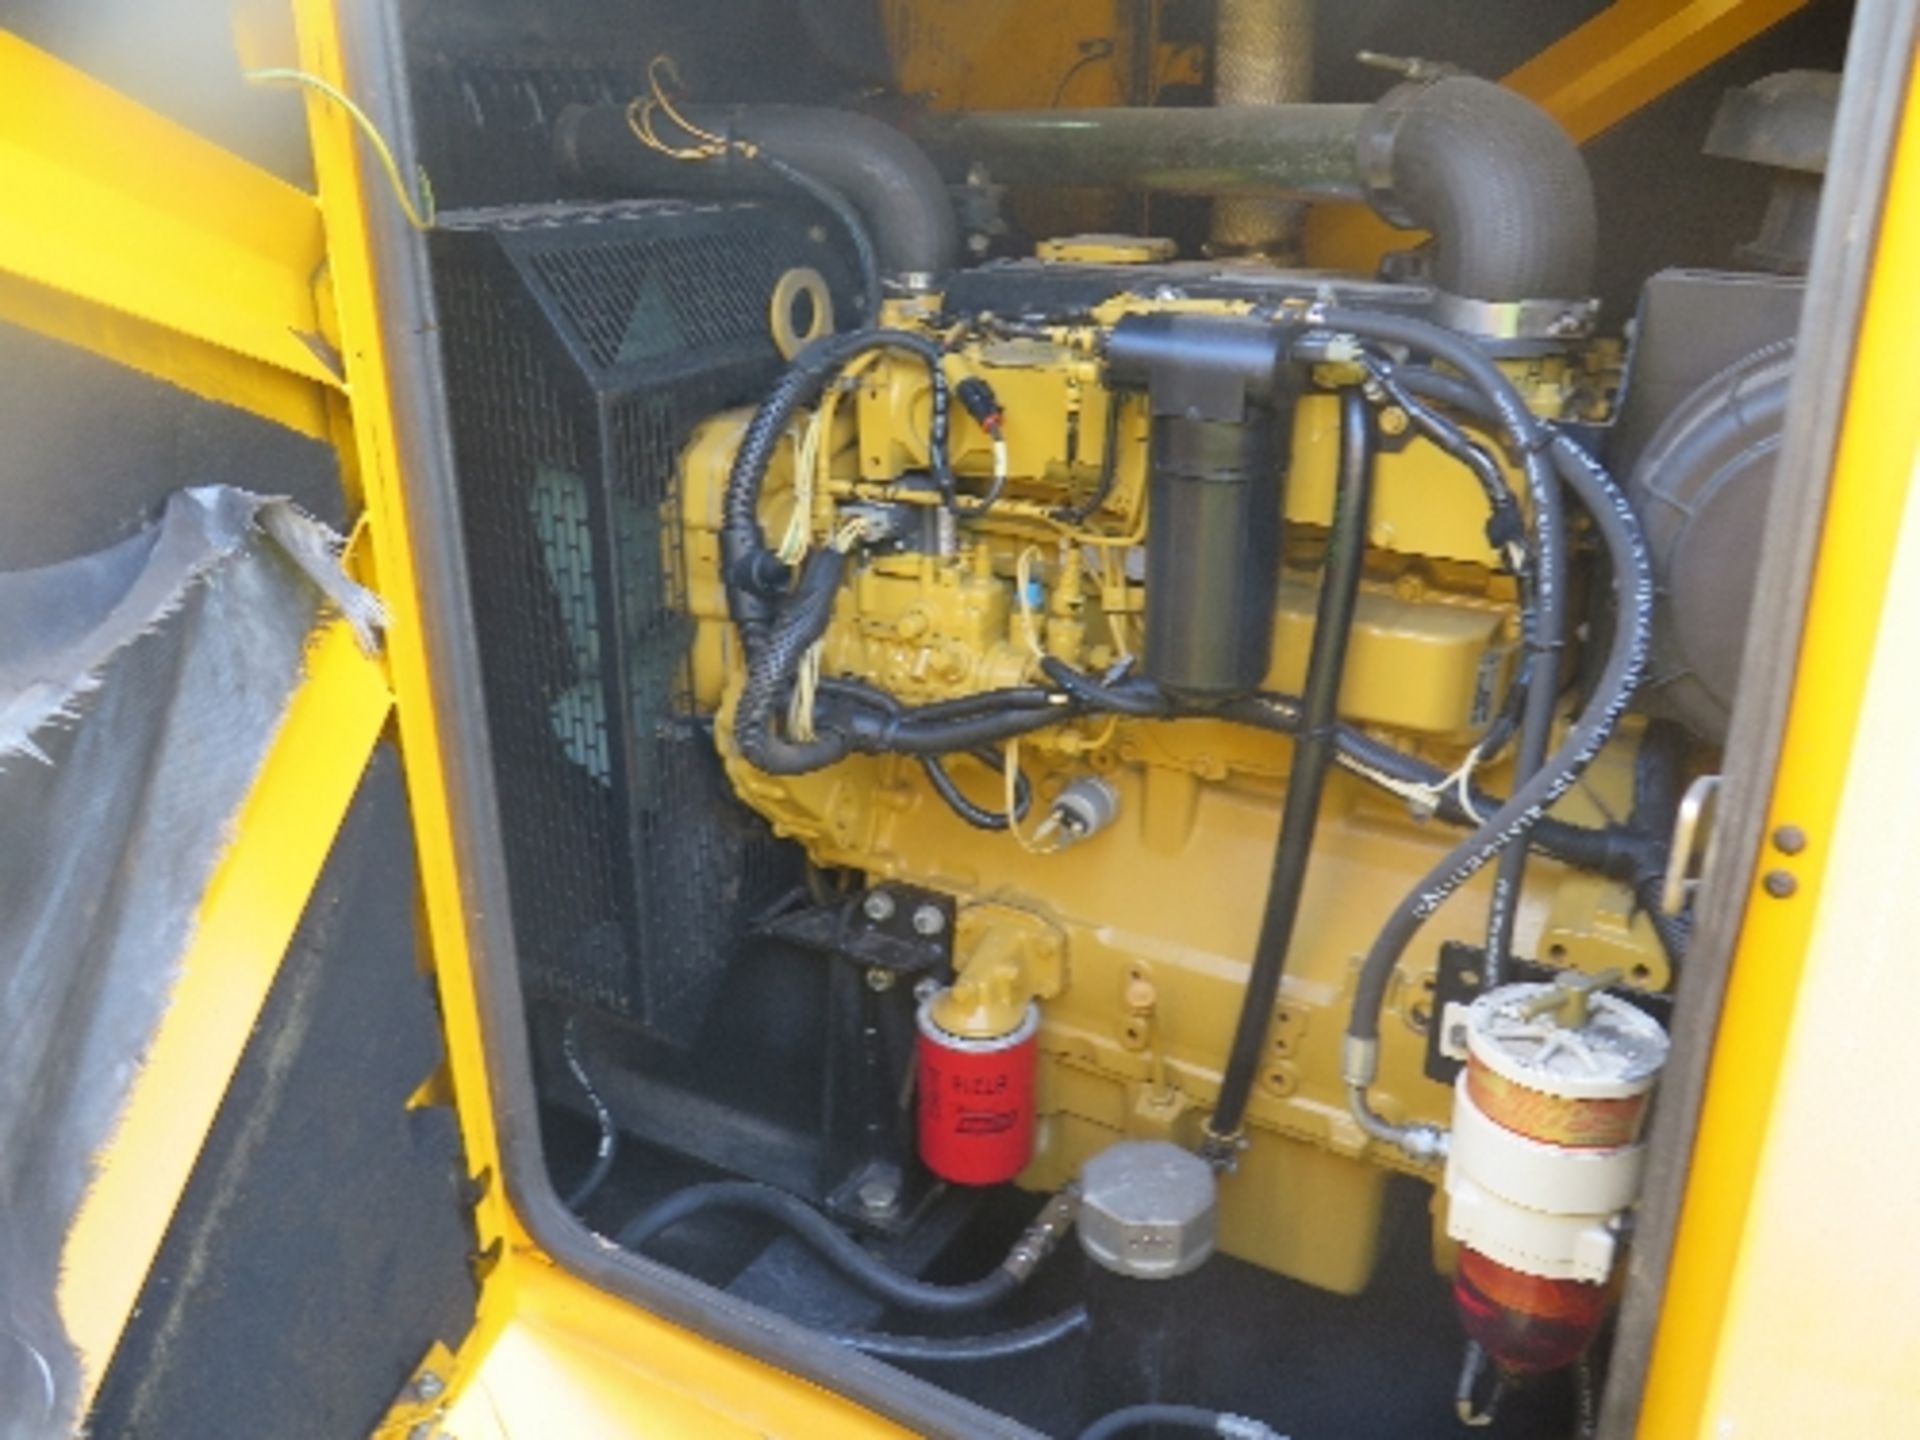 Caterpillar XQE100 generator 17983 hrs 158071
PERKINS - RUNS AND MAKES POWER
ALL LOTS are SOLD - Image 3 of 6